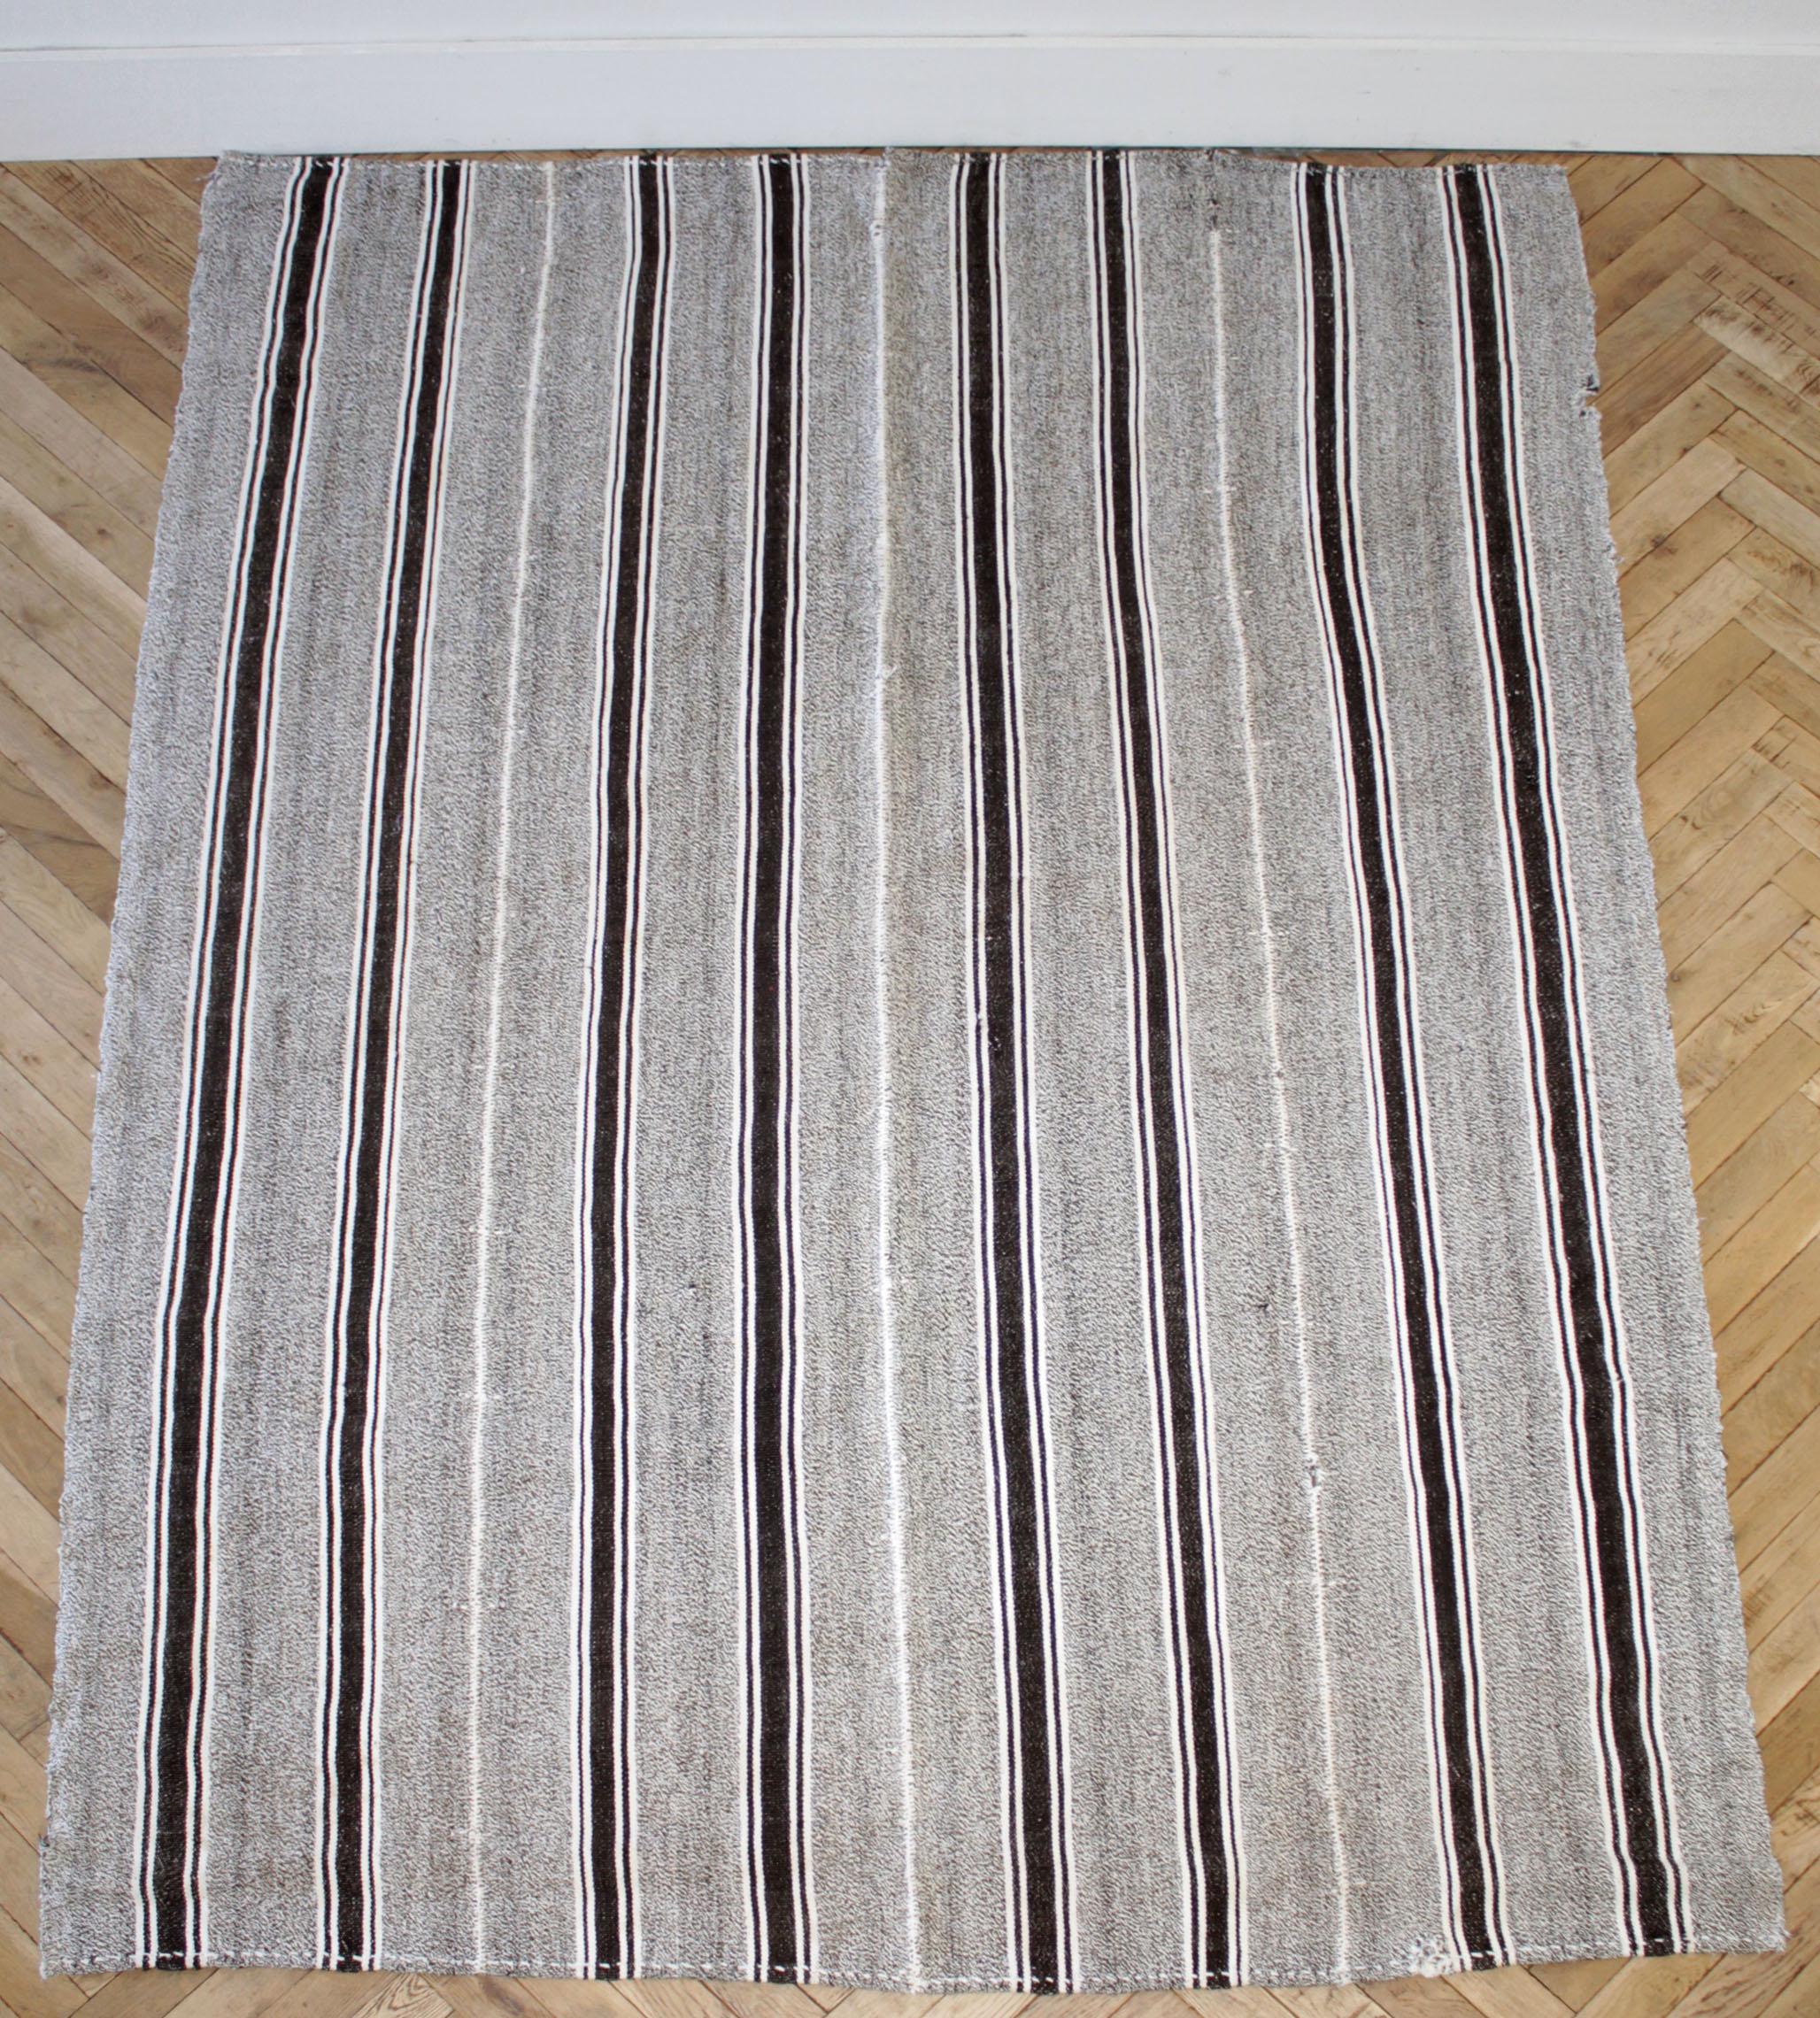 20th Century Vintage Turkish Flat-Weave Wool Rug in Brown and Creamy White Stripes For Sale